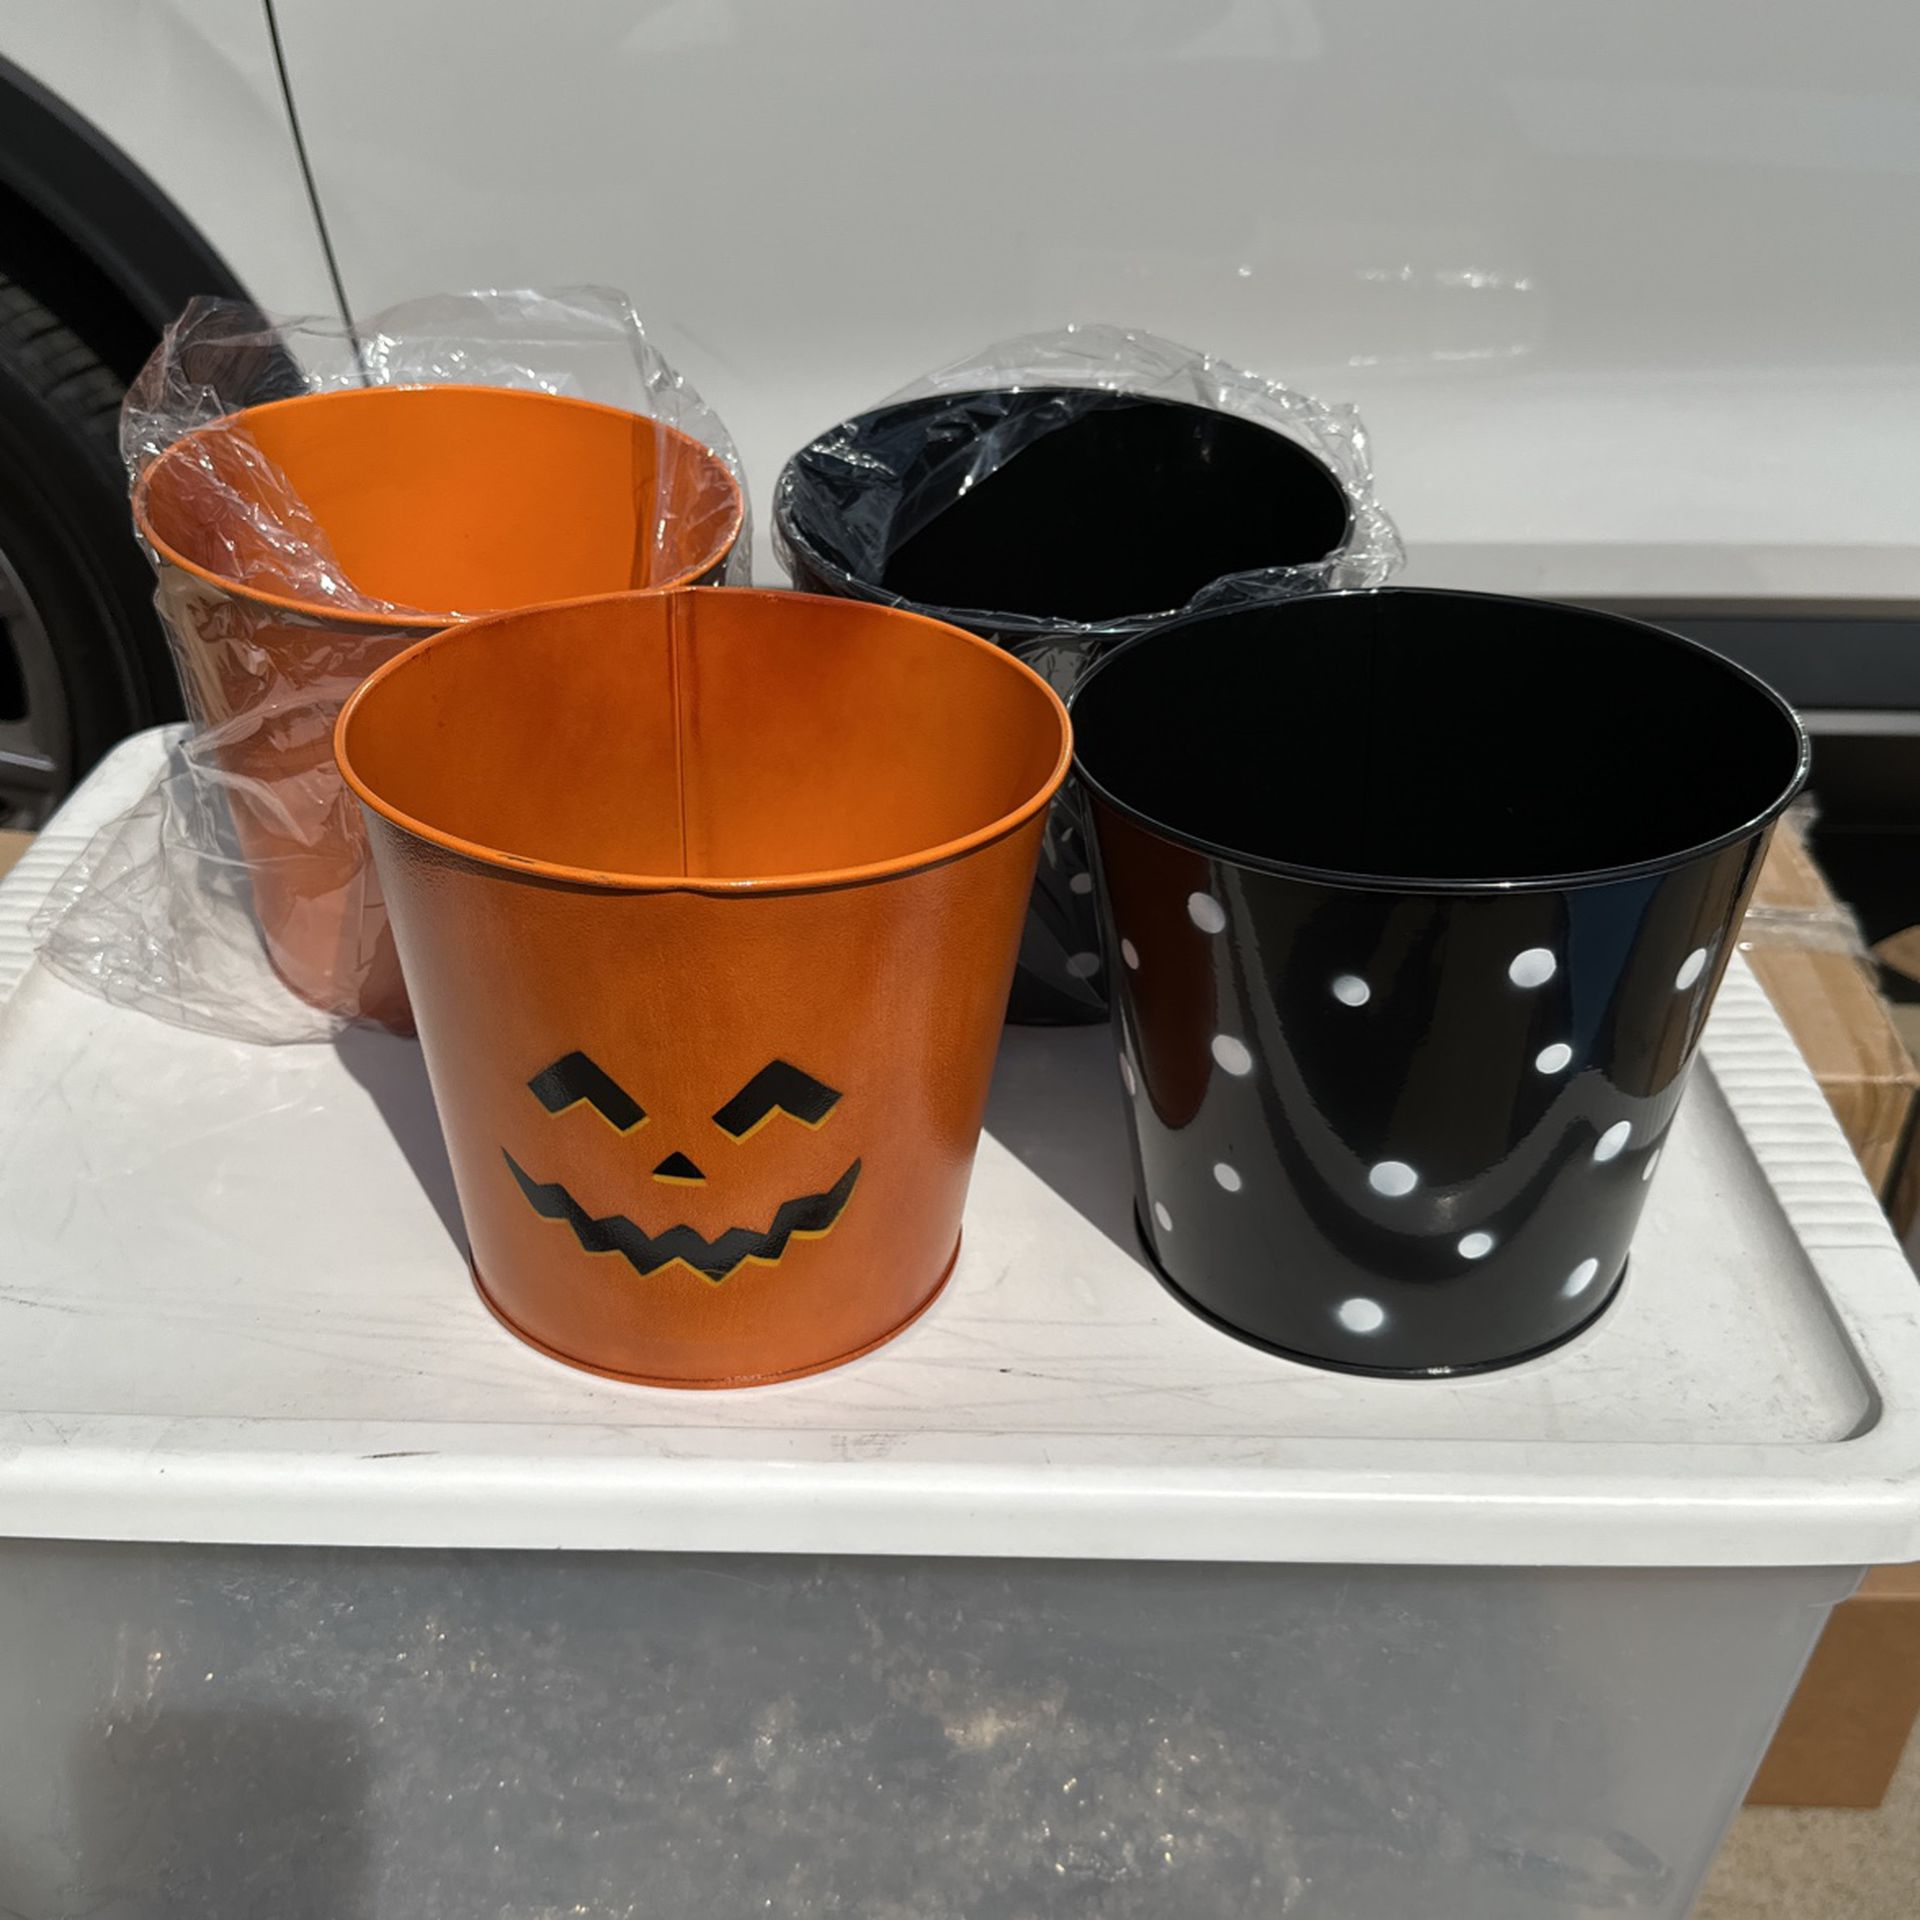 New Halloween Pails…$3.00 Each or 4 For $10.00